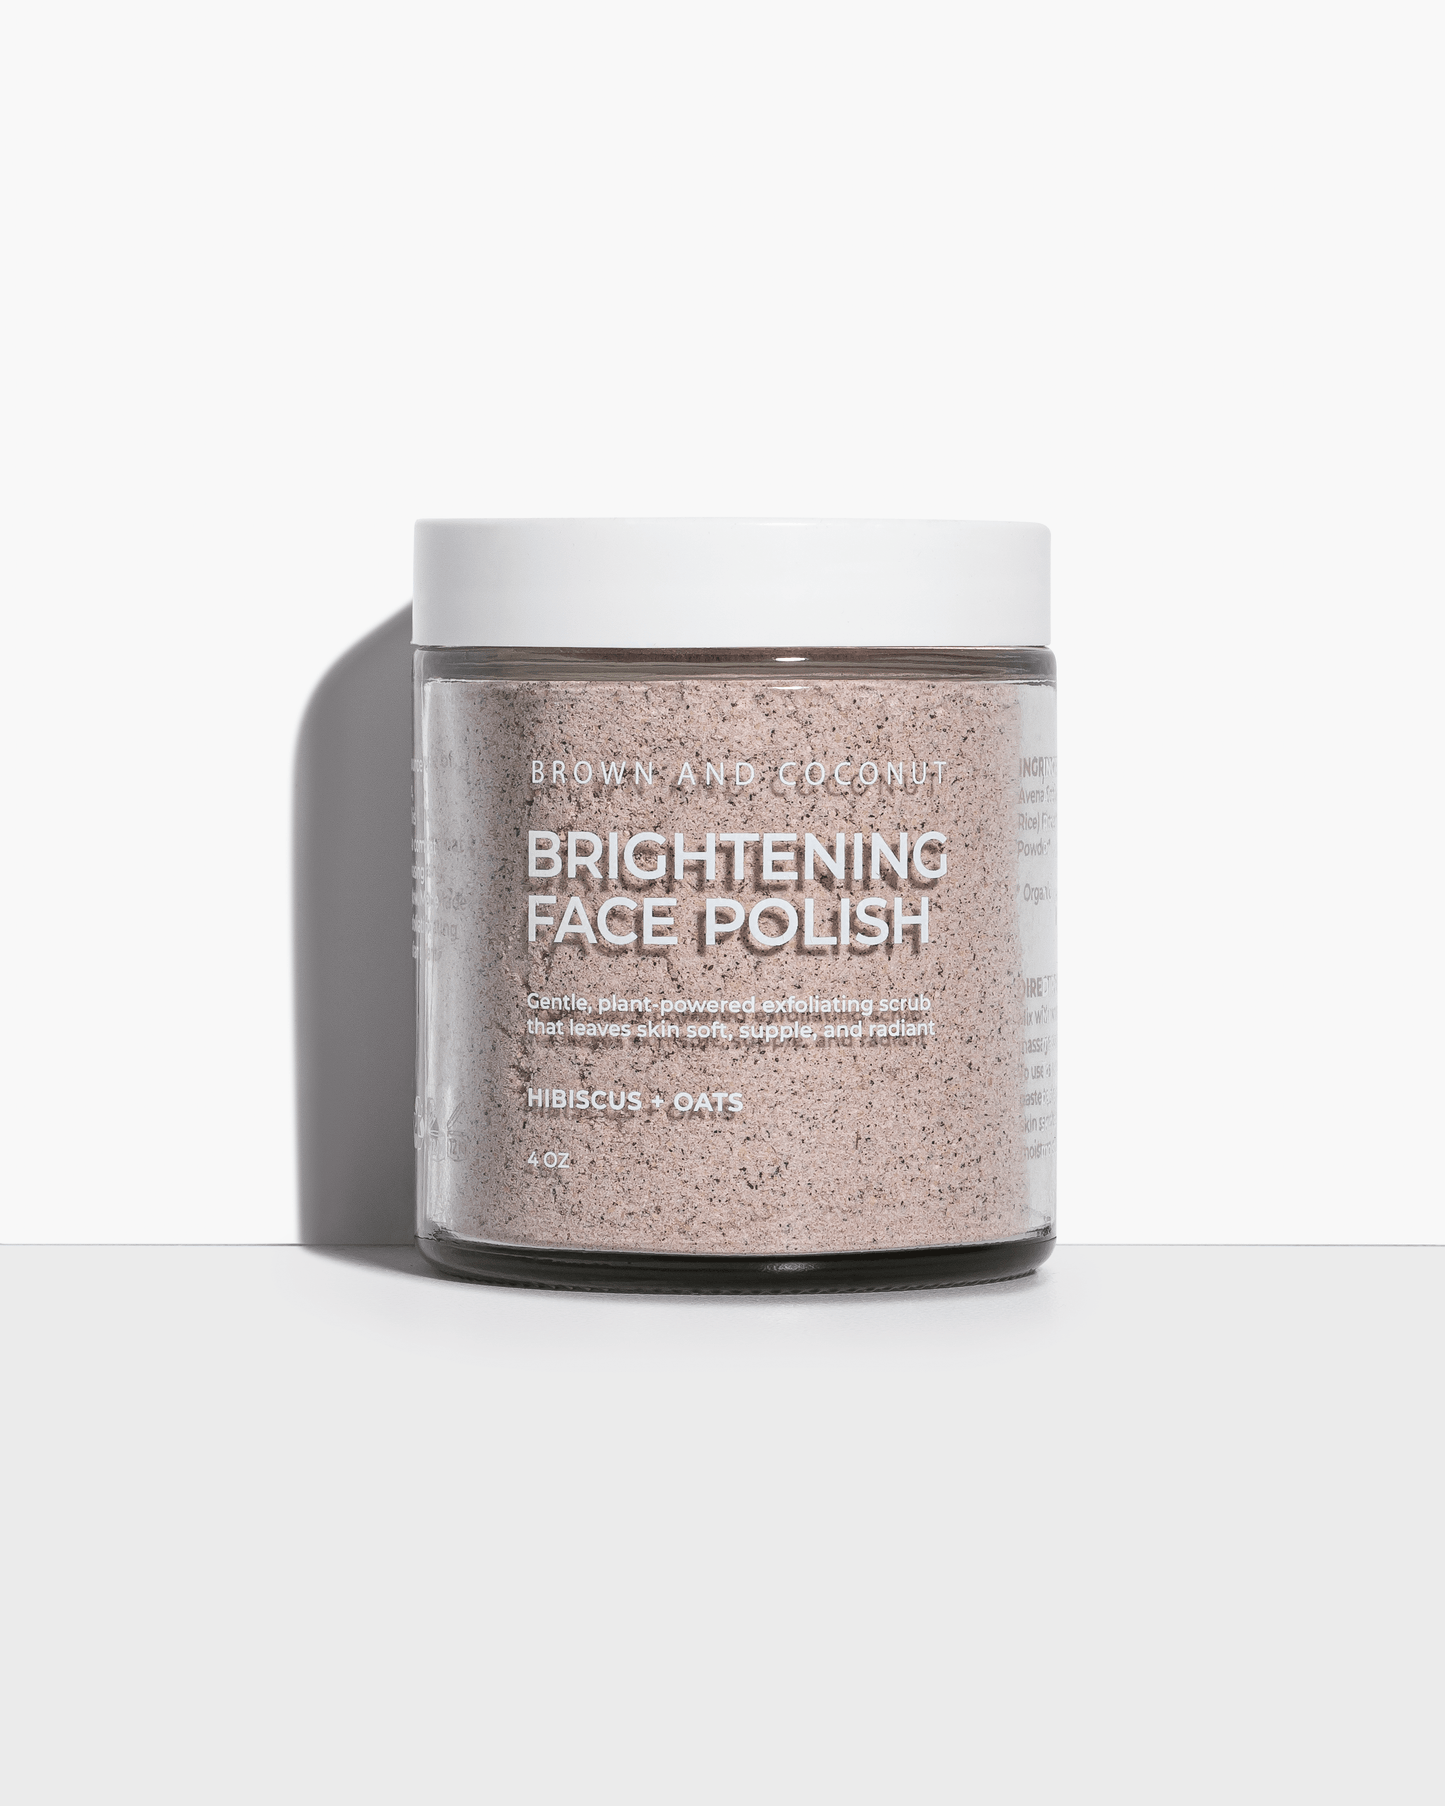 Brightening Face Polish - Brown and Coconut